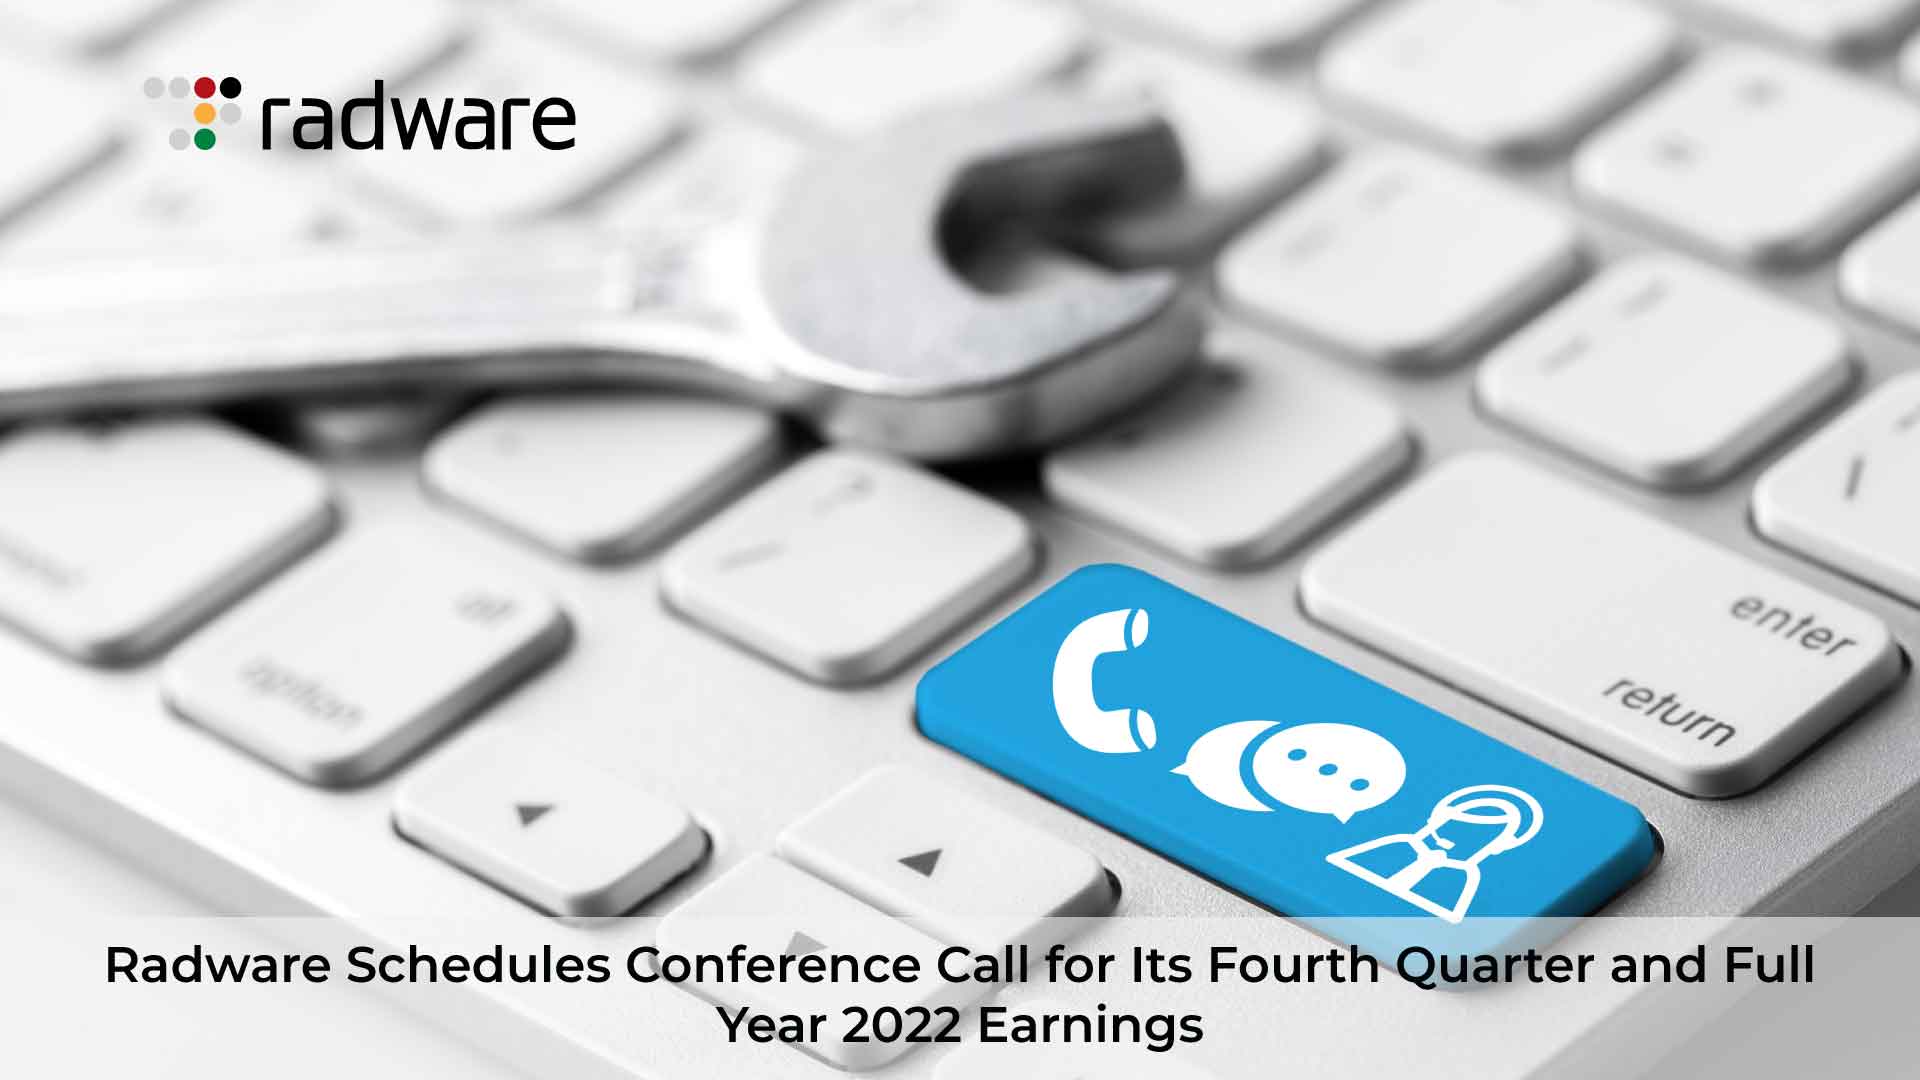 Radware Schedules Conference Call for Its Fourth Quarter and Full Year 2022 Earnings